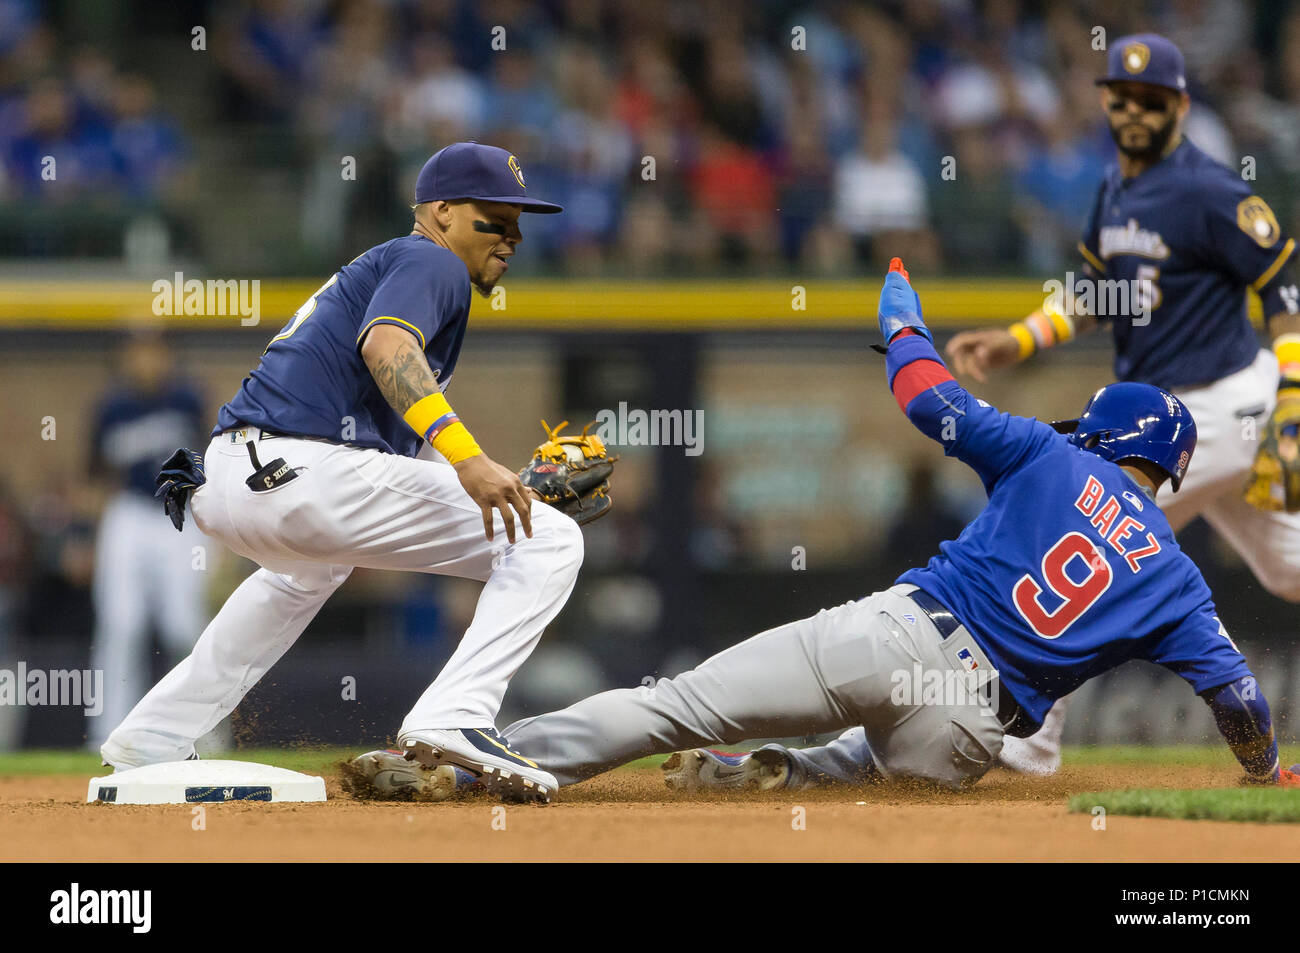 Milwaukee, WI, USA. 11th June, 2018. Chicago Cubs second baseman Javier Baez  #9 steals second base and slides under the tag of .Milwaukee Brewers  shortstop Orlando Arcia #3 during the Major League